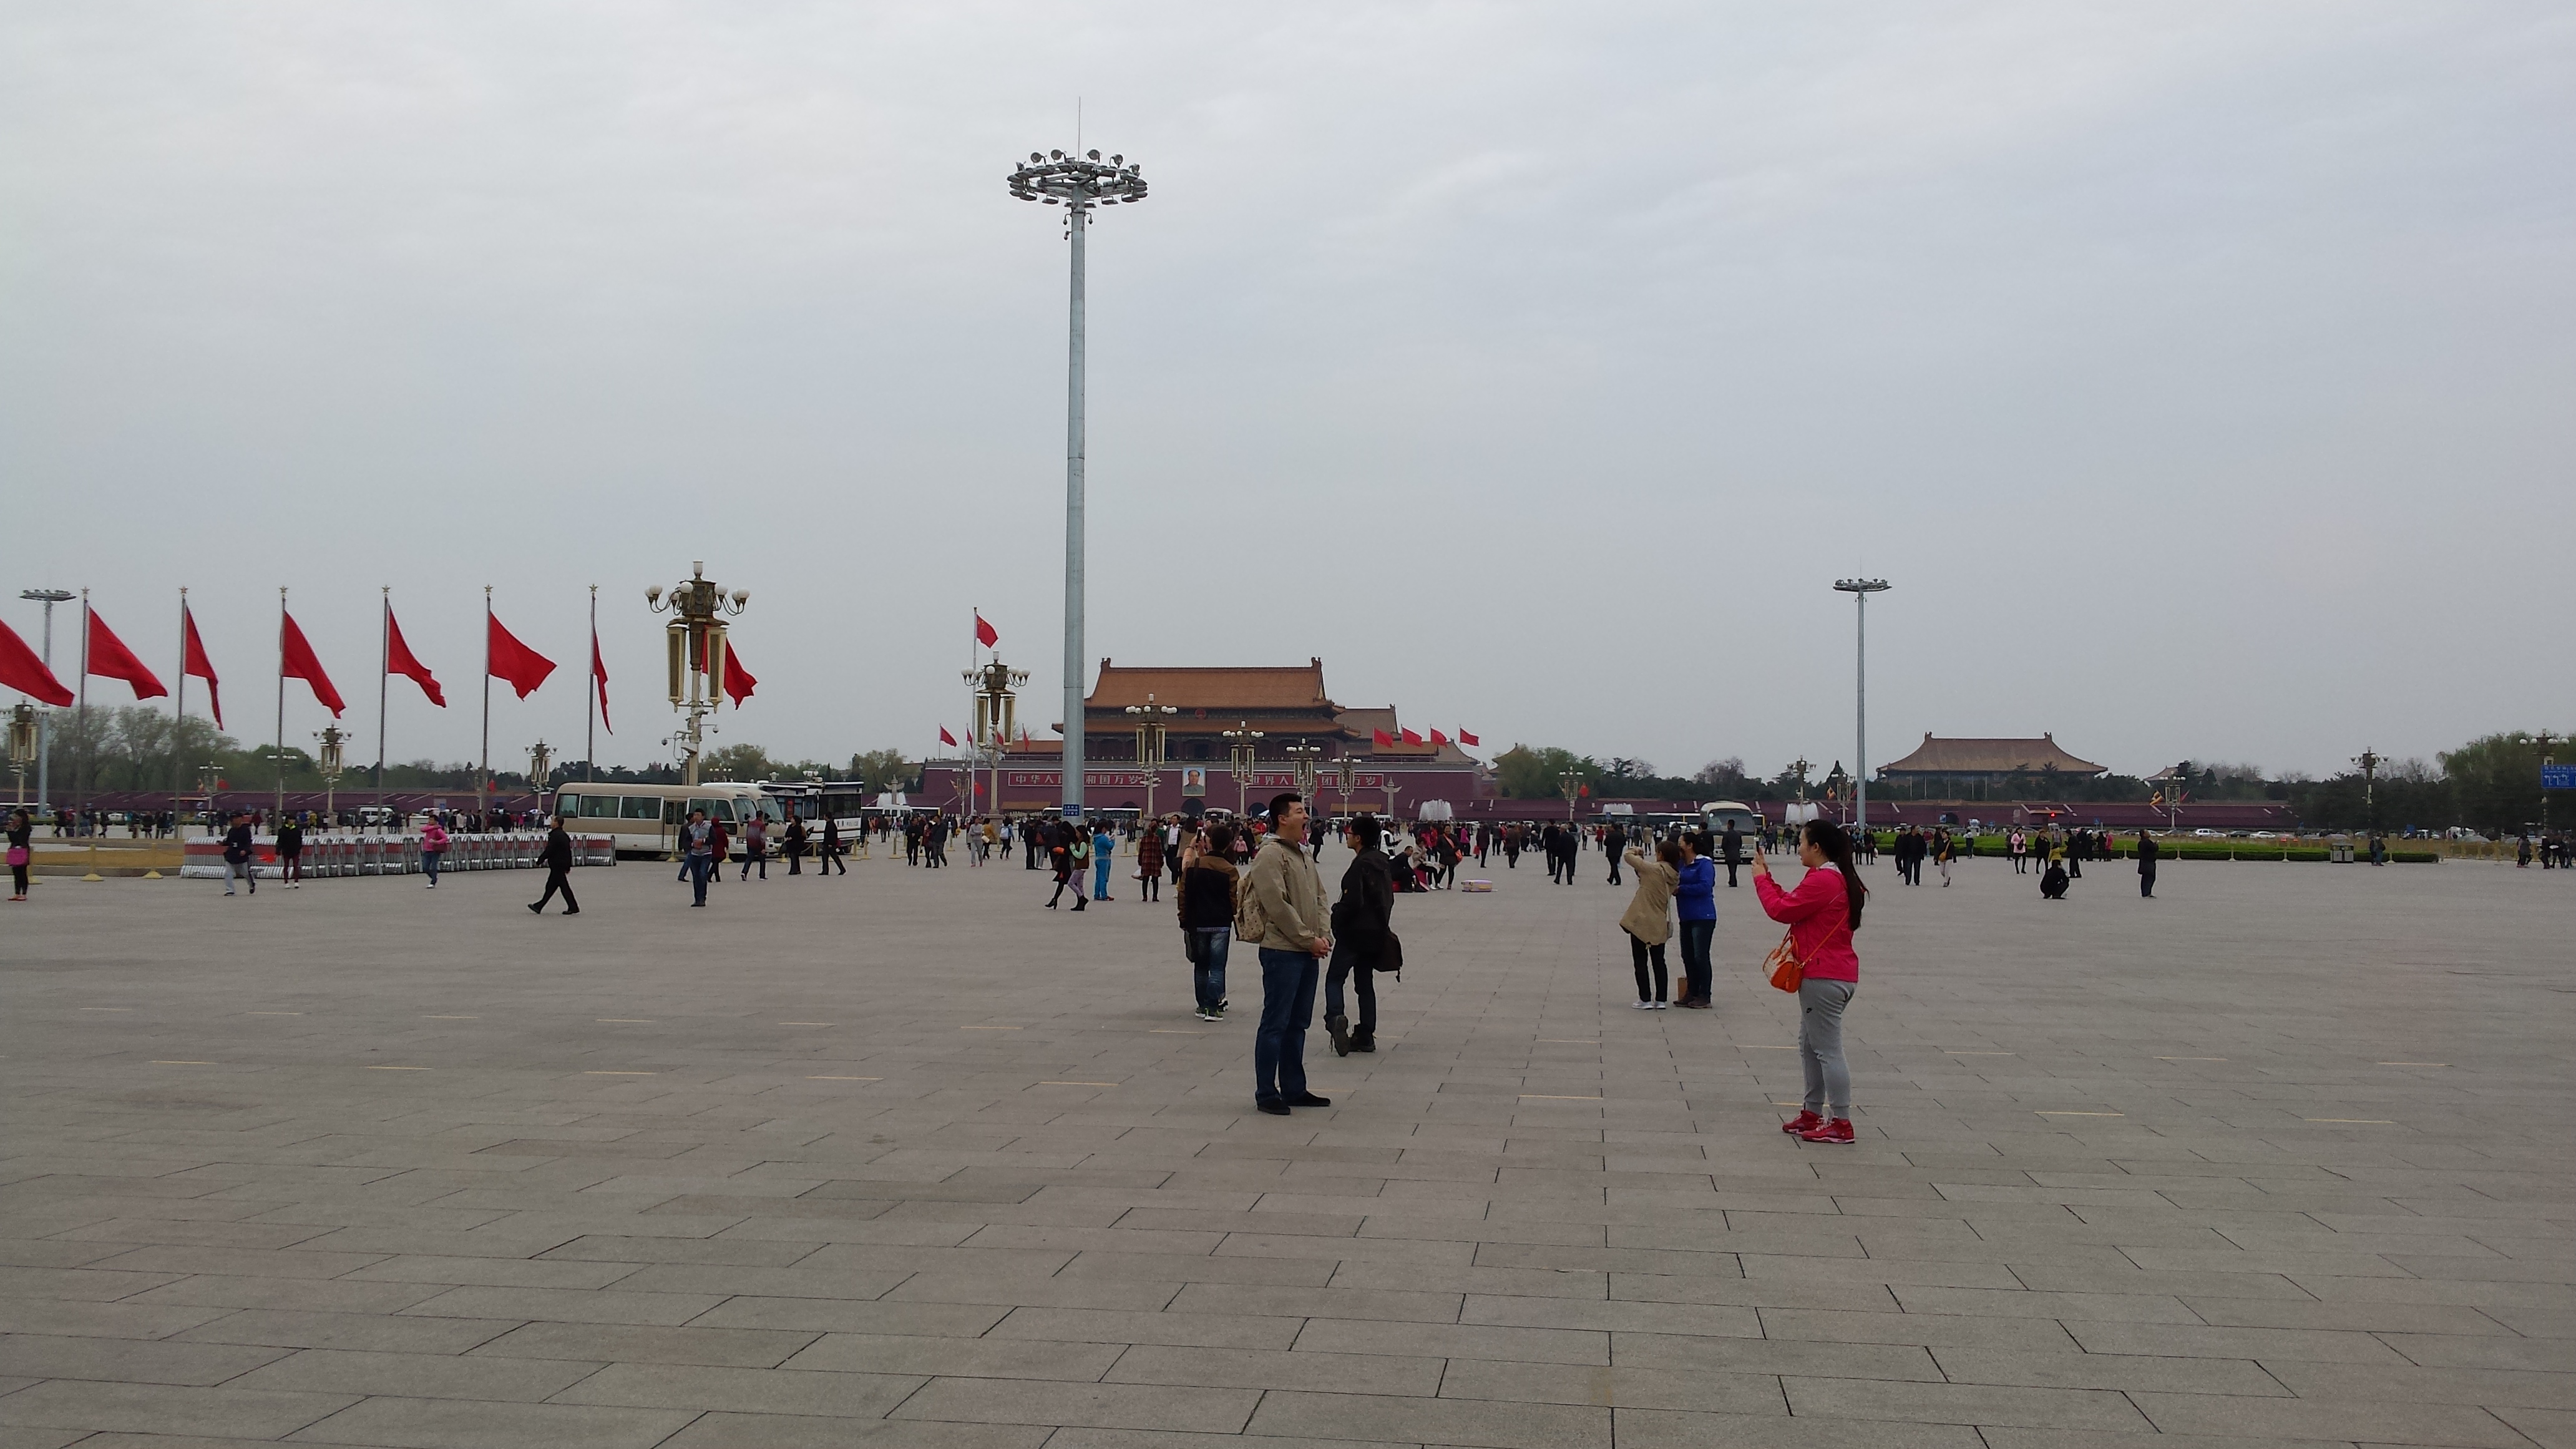 Tiananmen Square and the access gate to the Forbidden city